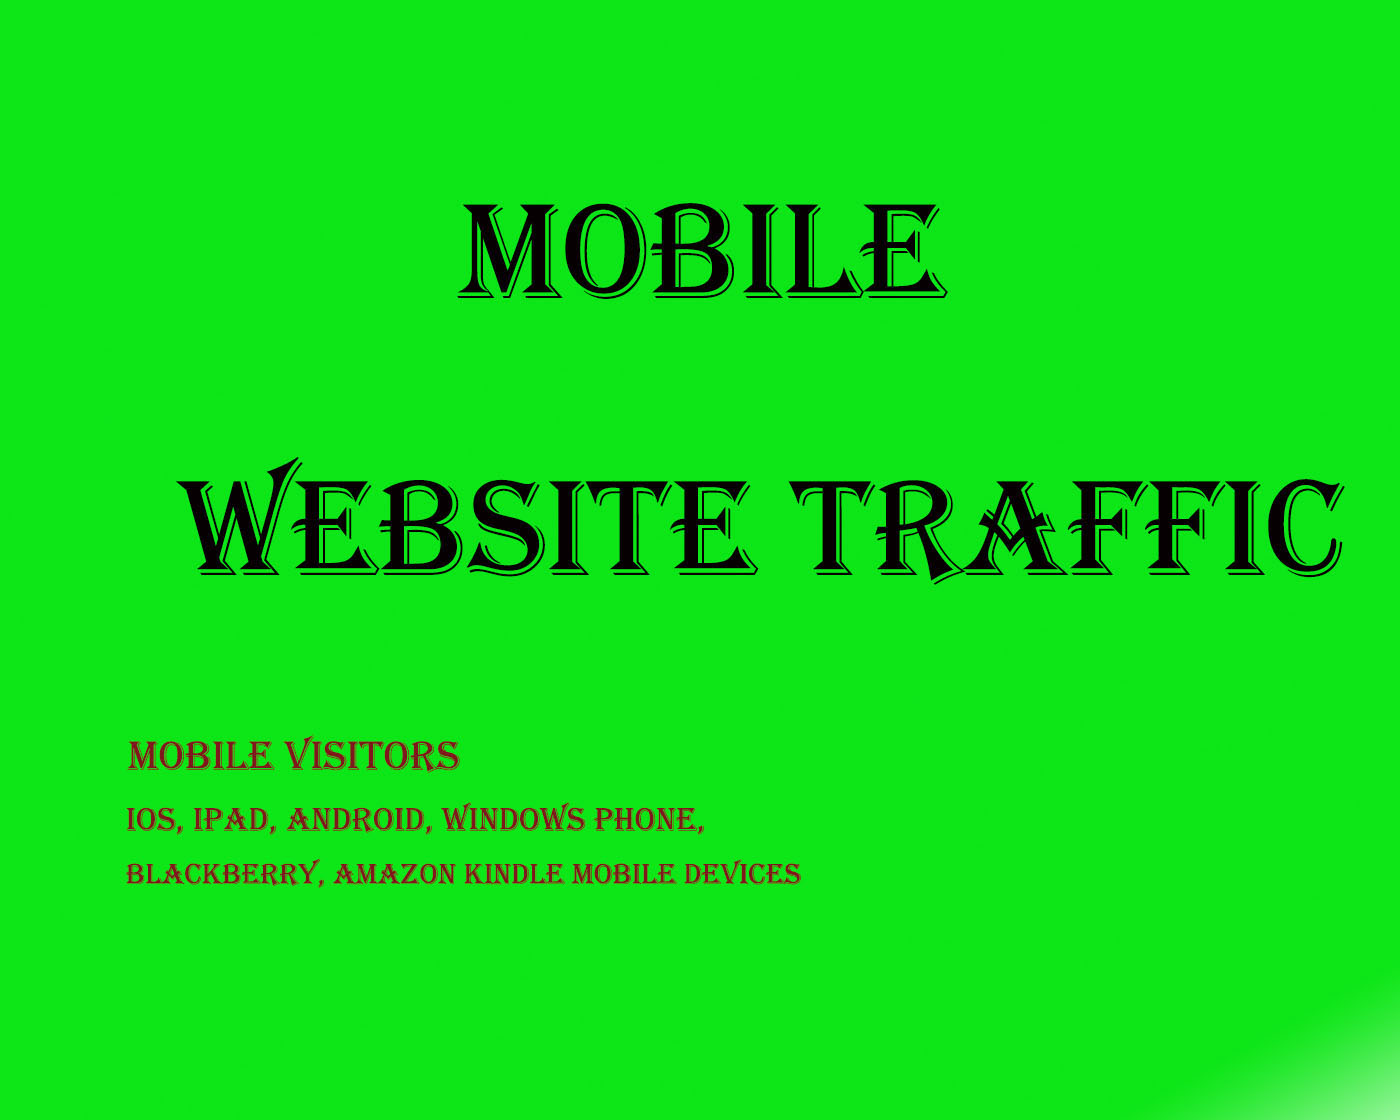 Genuine IOS and Android Mobile Traffic 30